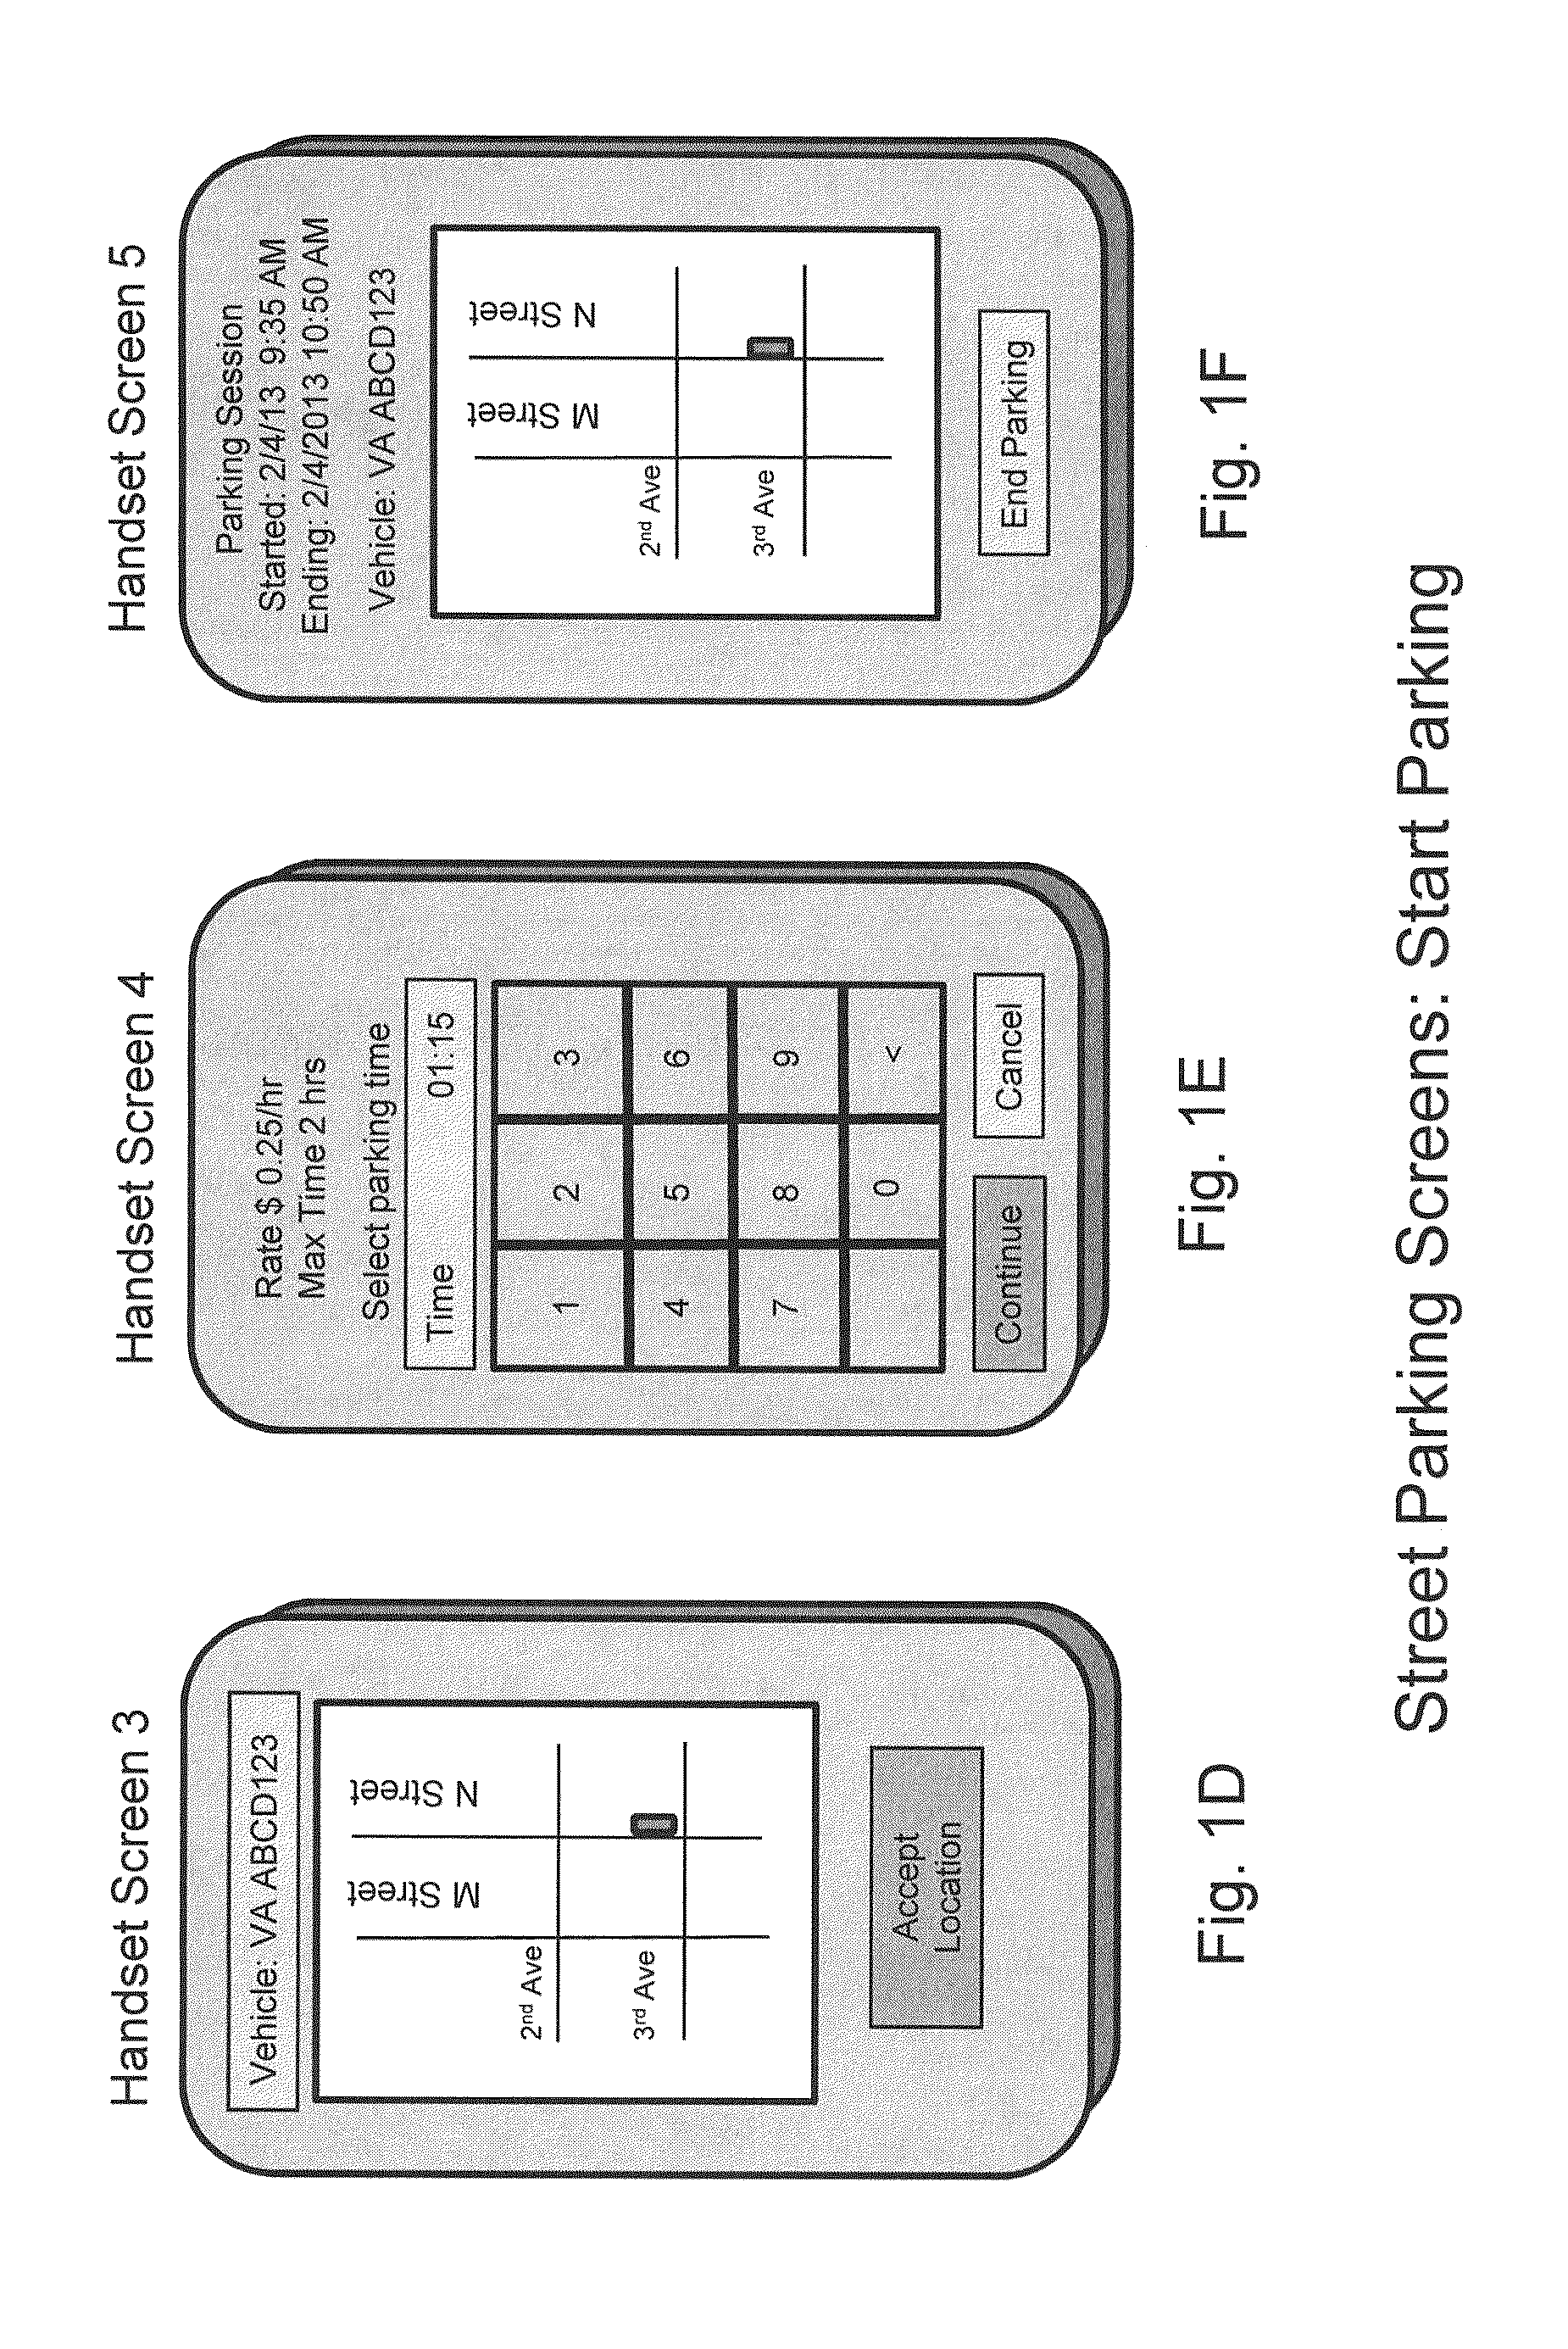 Methods and systems for electronic payment for parking using autonomous position sensing